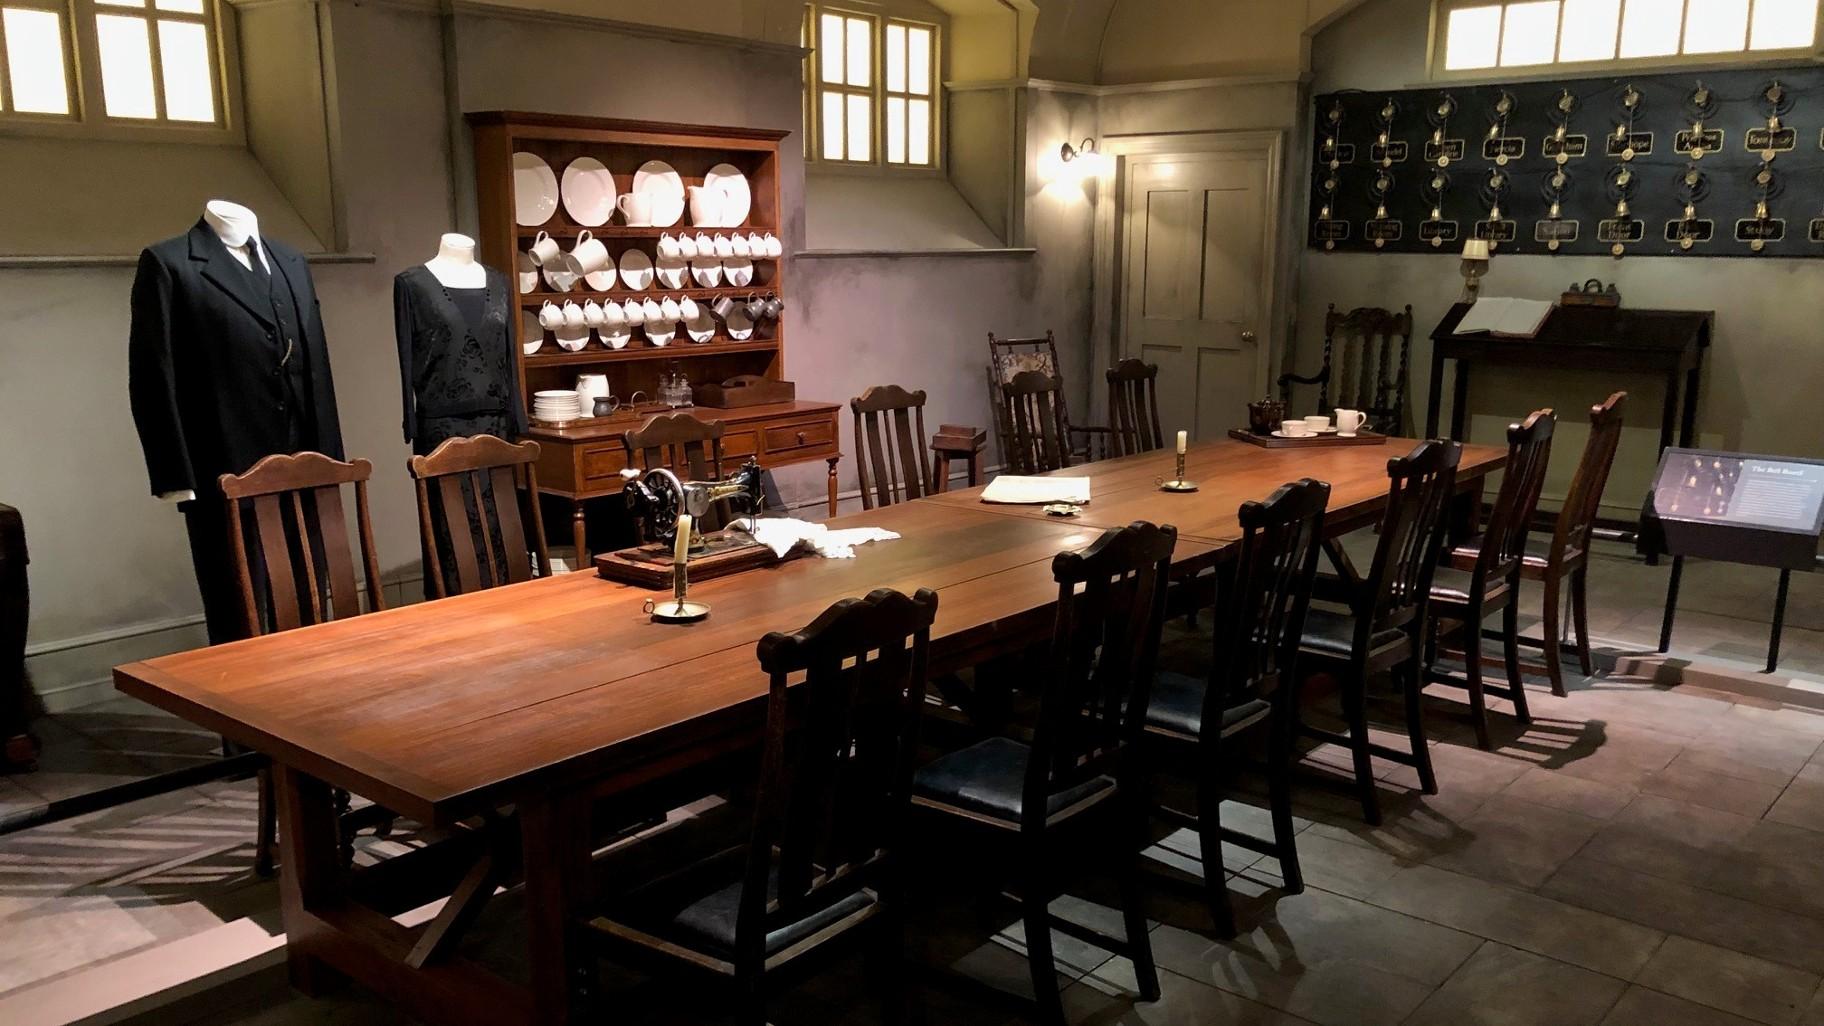 The servant's dining table at Downton Abbey: The Exhibition.” (Marc Vitali / WTTW News)